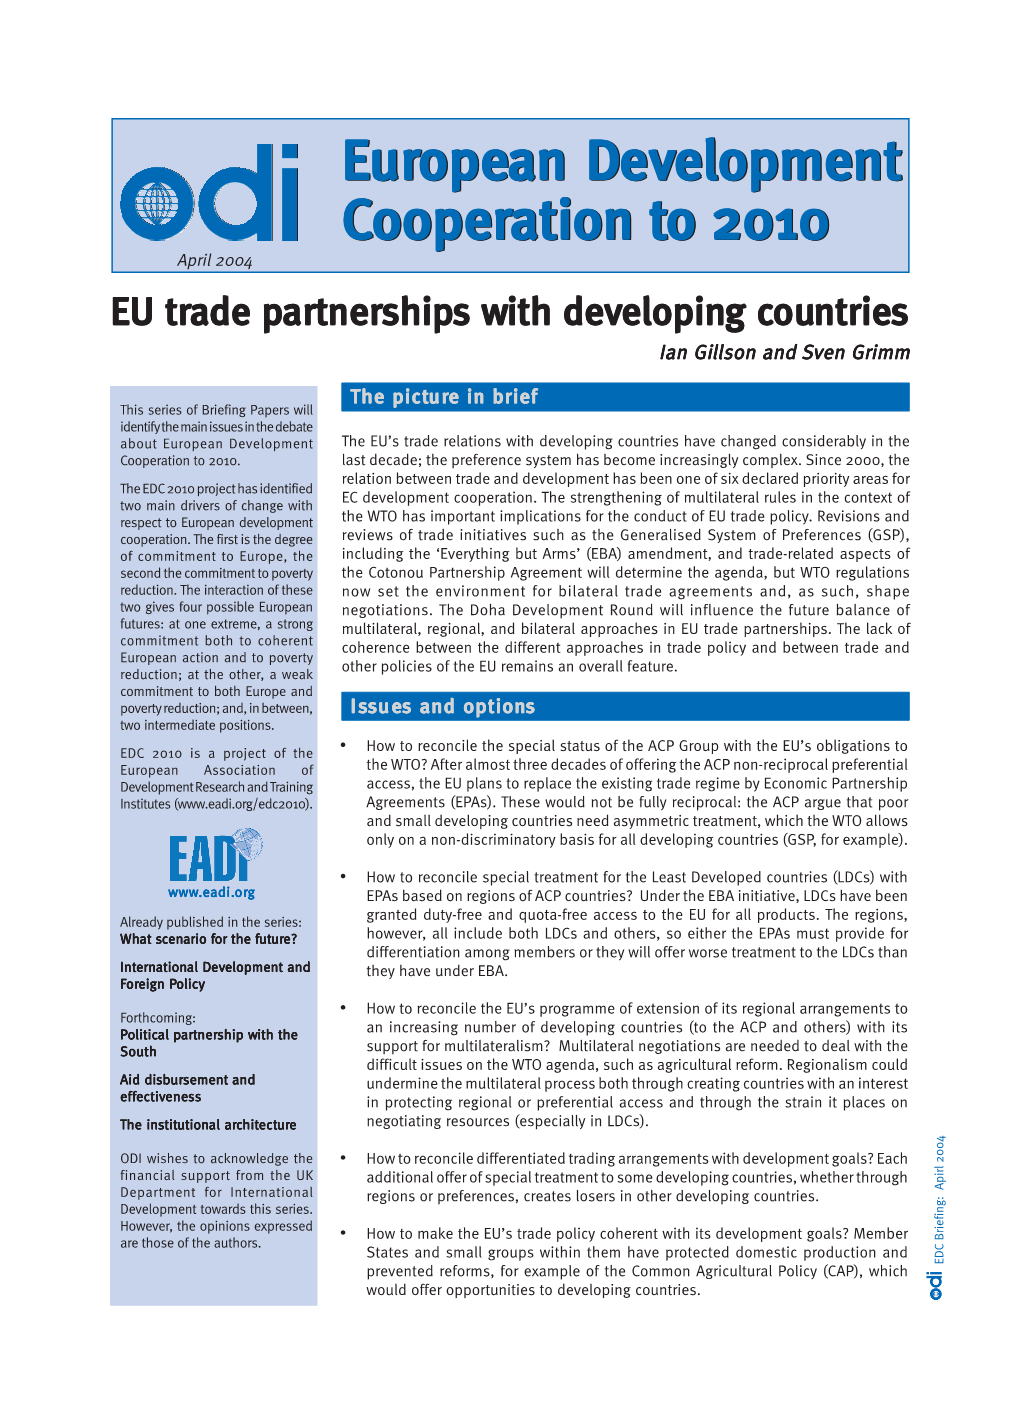 EU Trade Partnerships with Developing Countries Ian Gillson and Sven Grimm